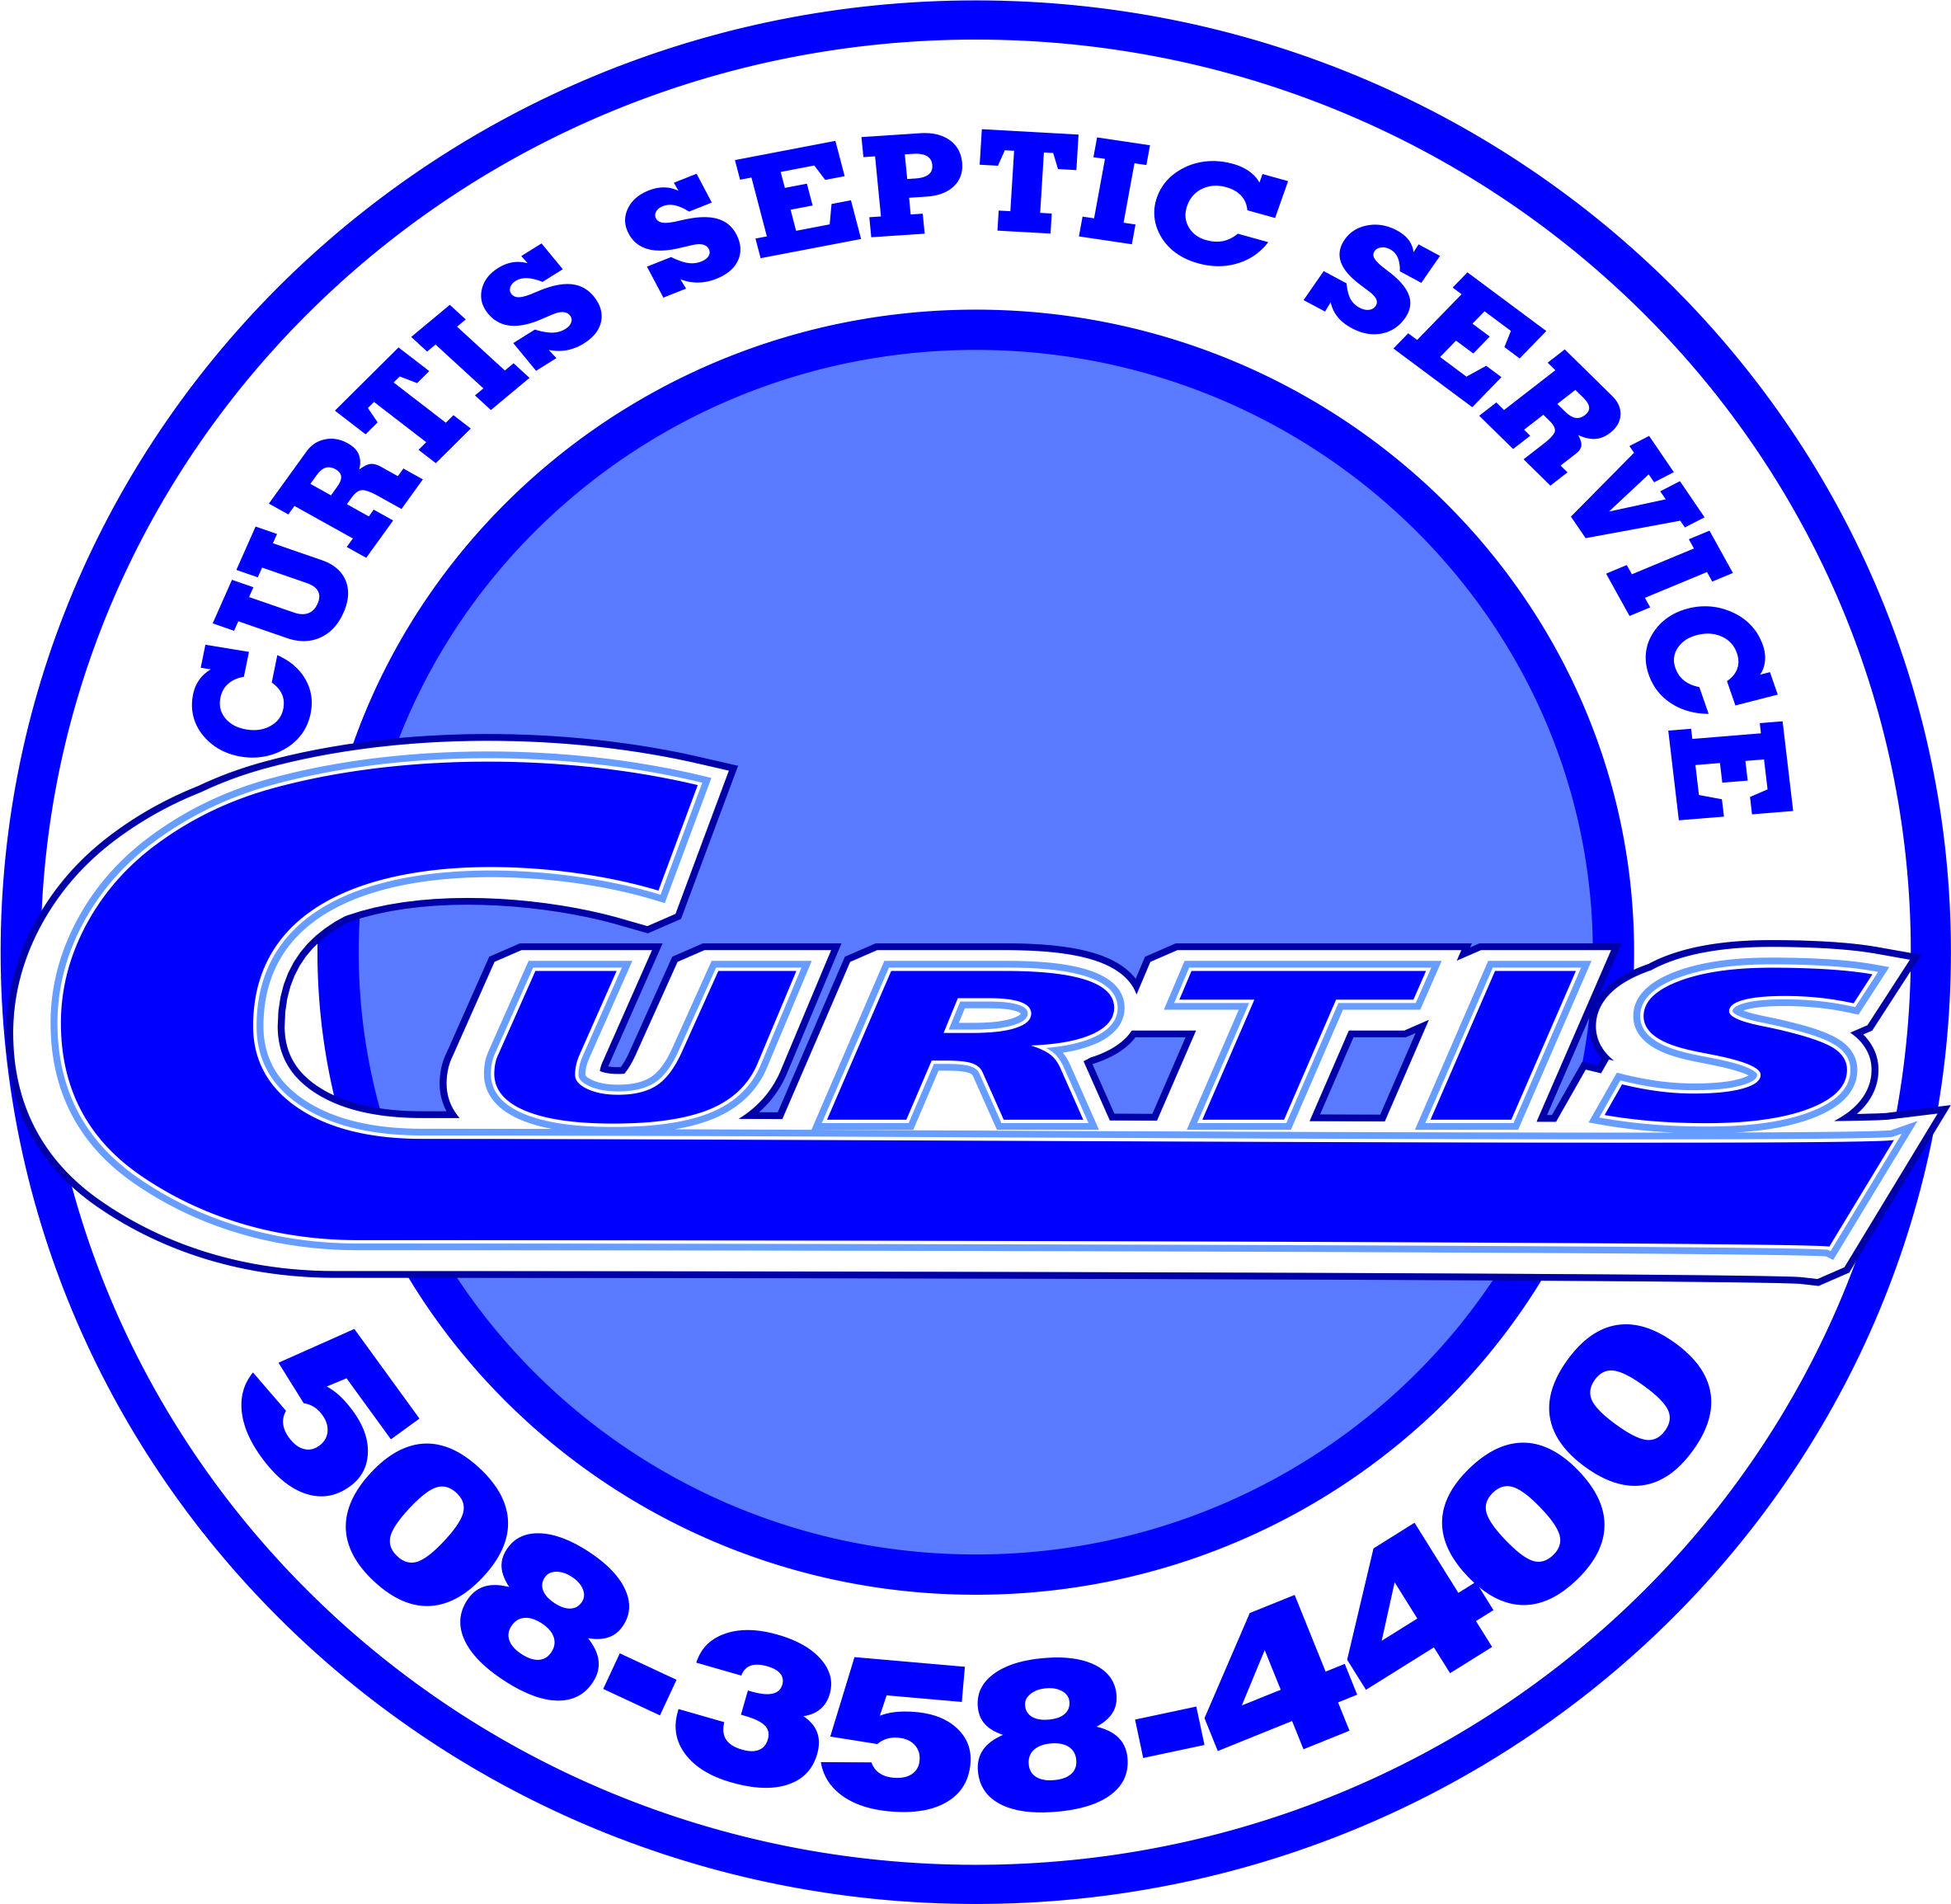 Septic system inspectors in Worcester, MA.